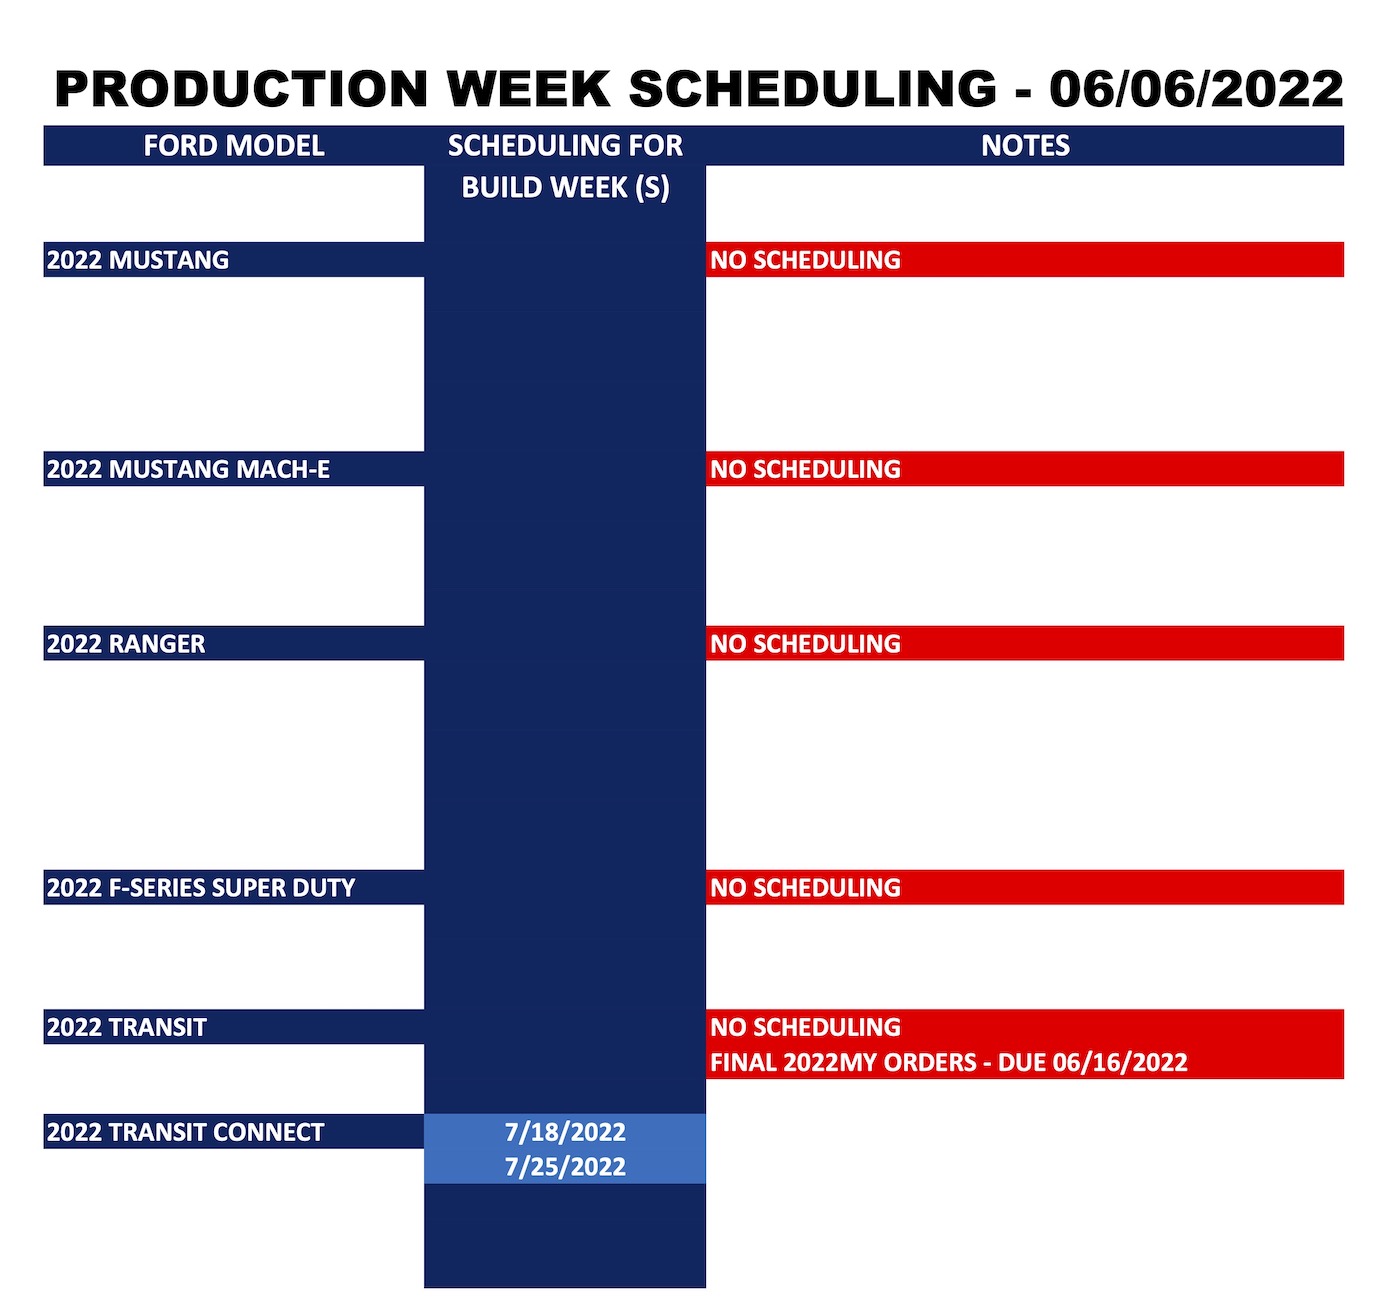 Ford Forums_Production Week Scheduling_2022-06-06_2.jpg